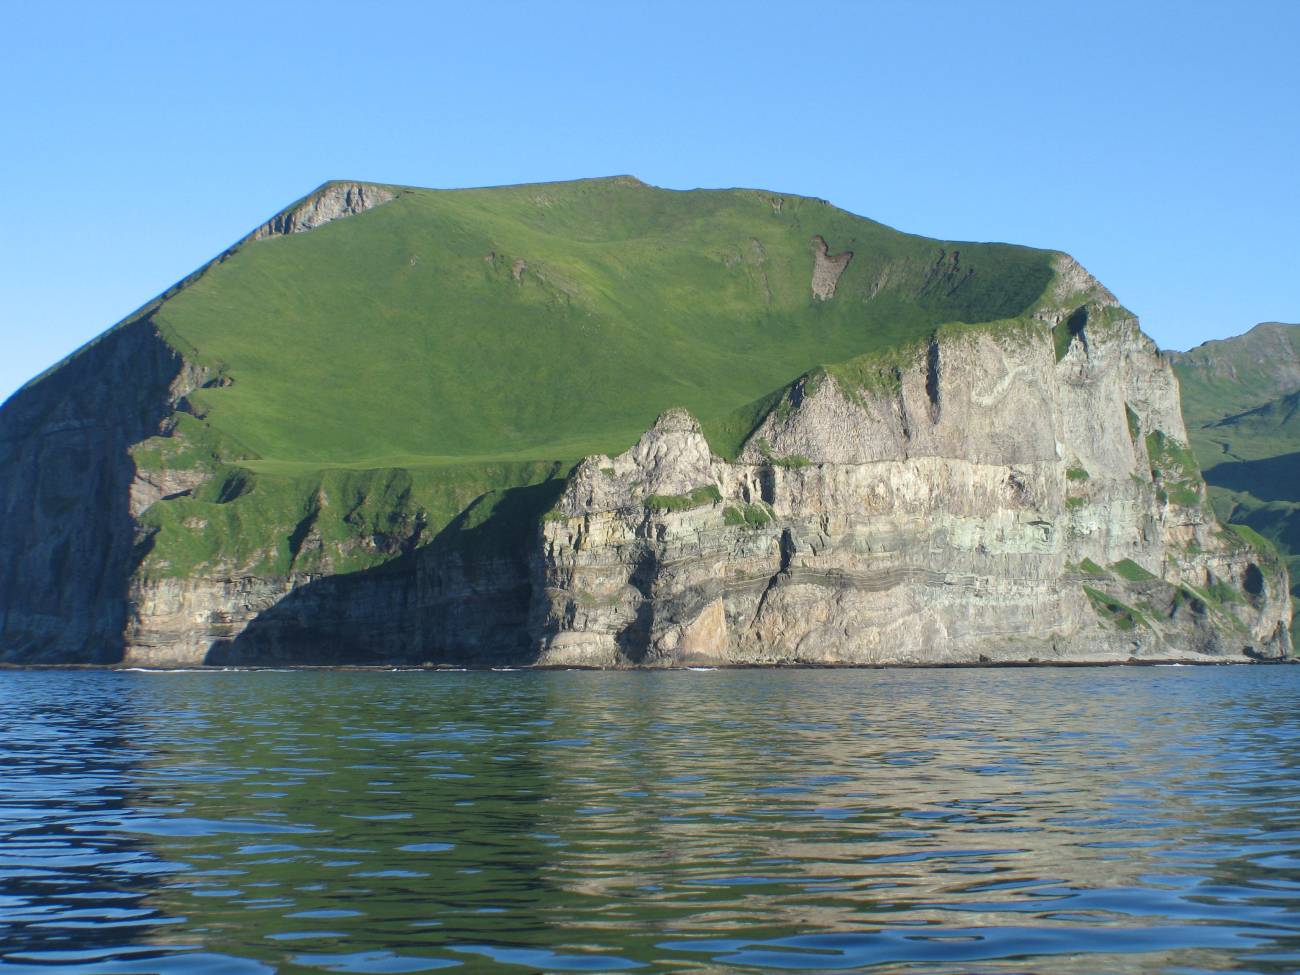 Cape Prominence on the south side of Unalaska Island